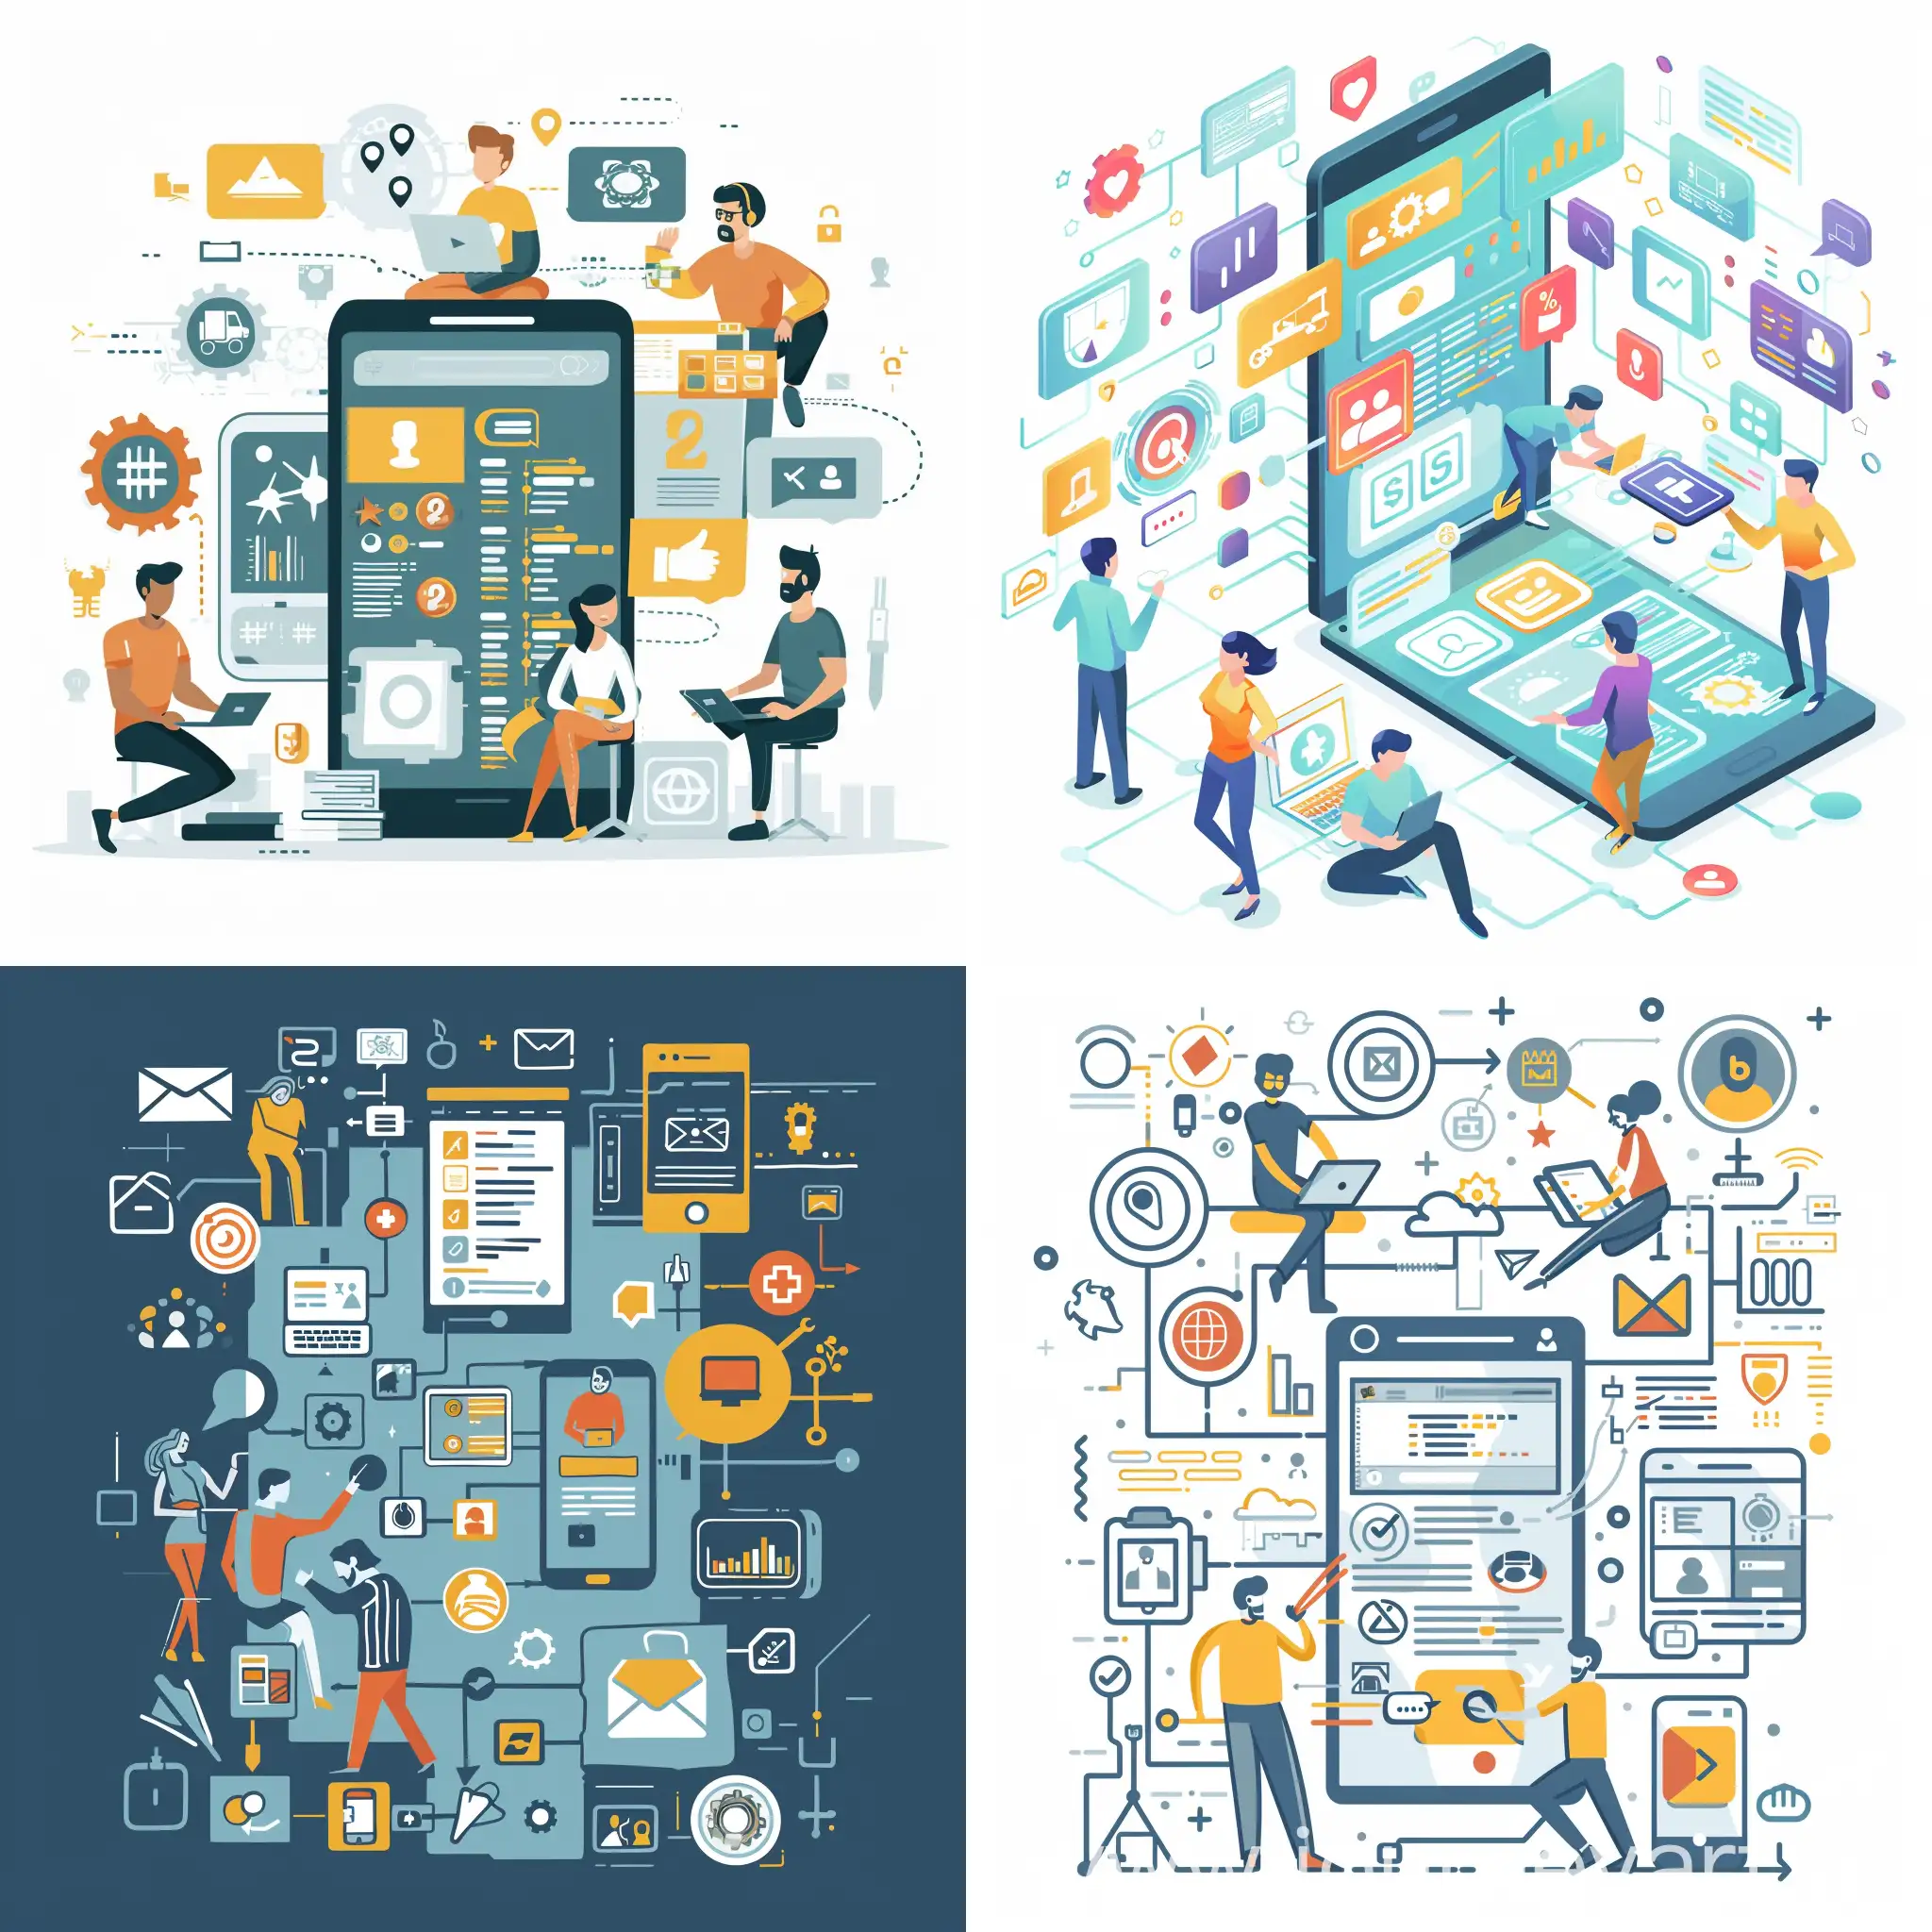 Illustration showcasing a team of developers collaborating on code and design elements, surrounded by icons representing various app features.